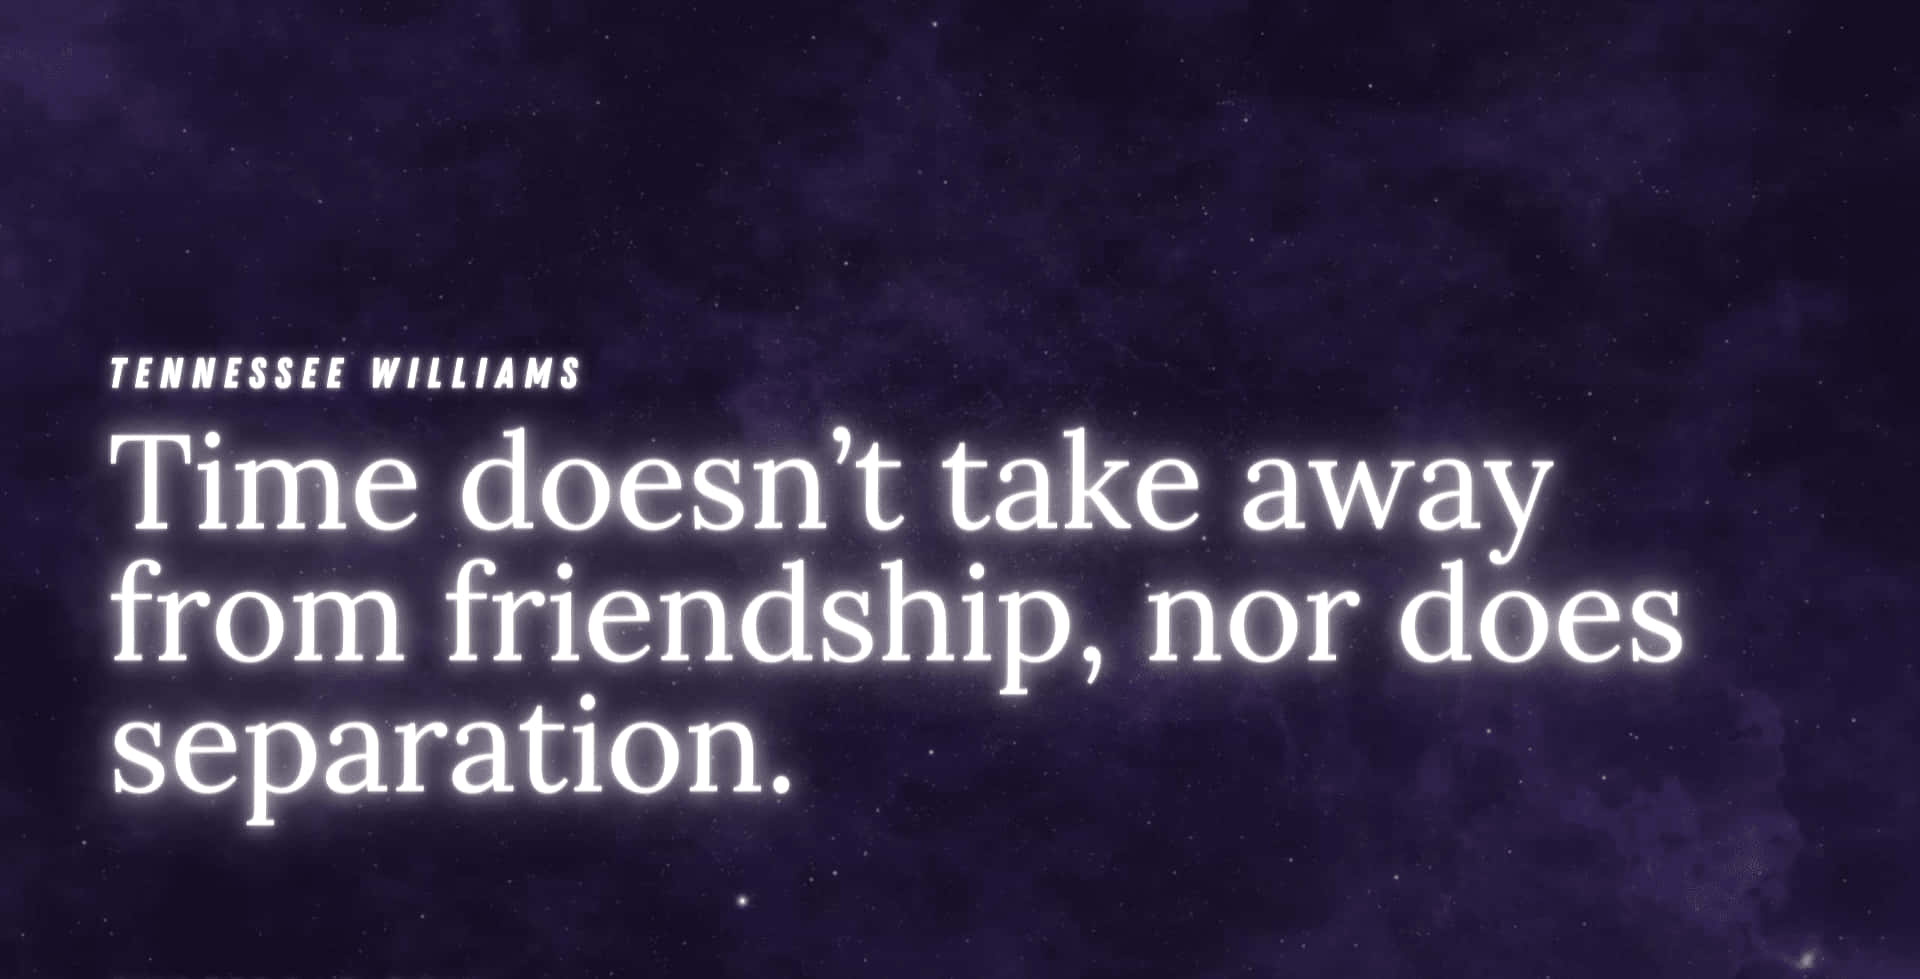 Tennessee Williams Friendship Quote Wallpaper